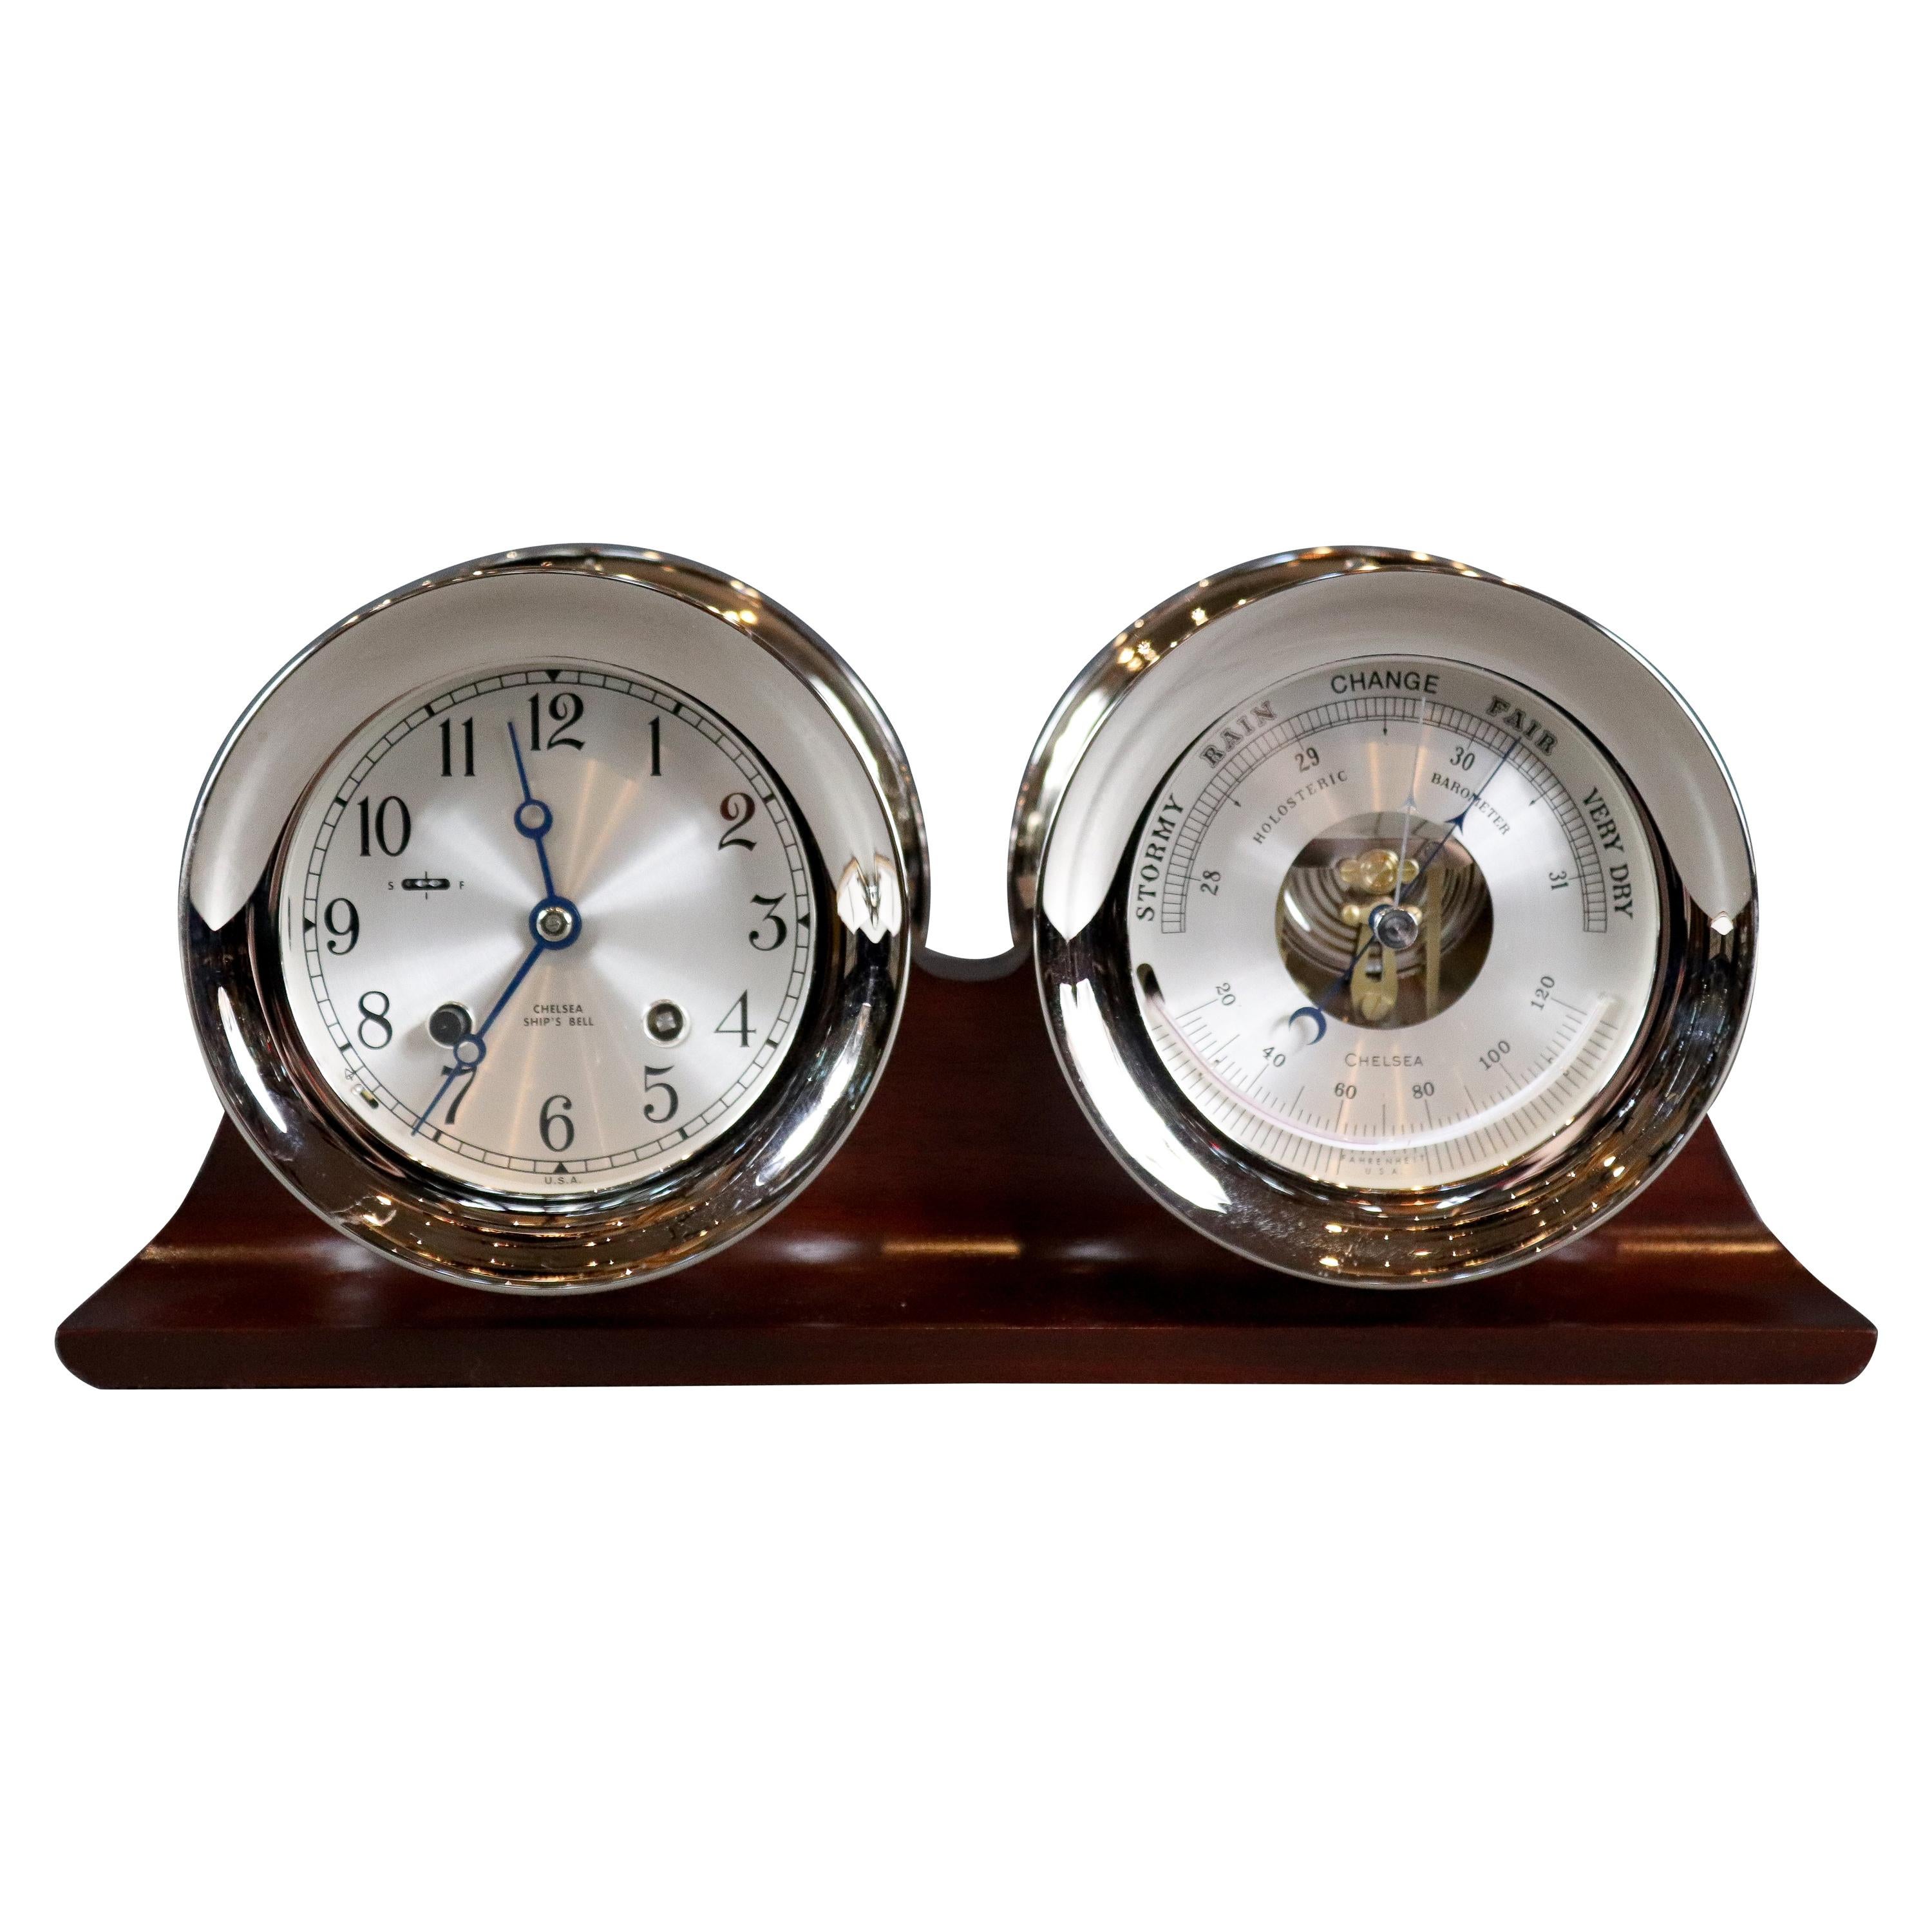 Ship's Bell Clock and Barometer by Chelsea Clock Co.